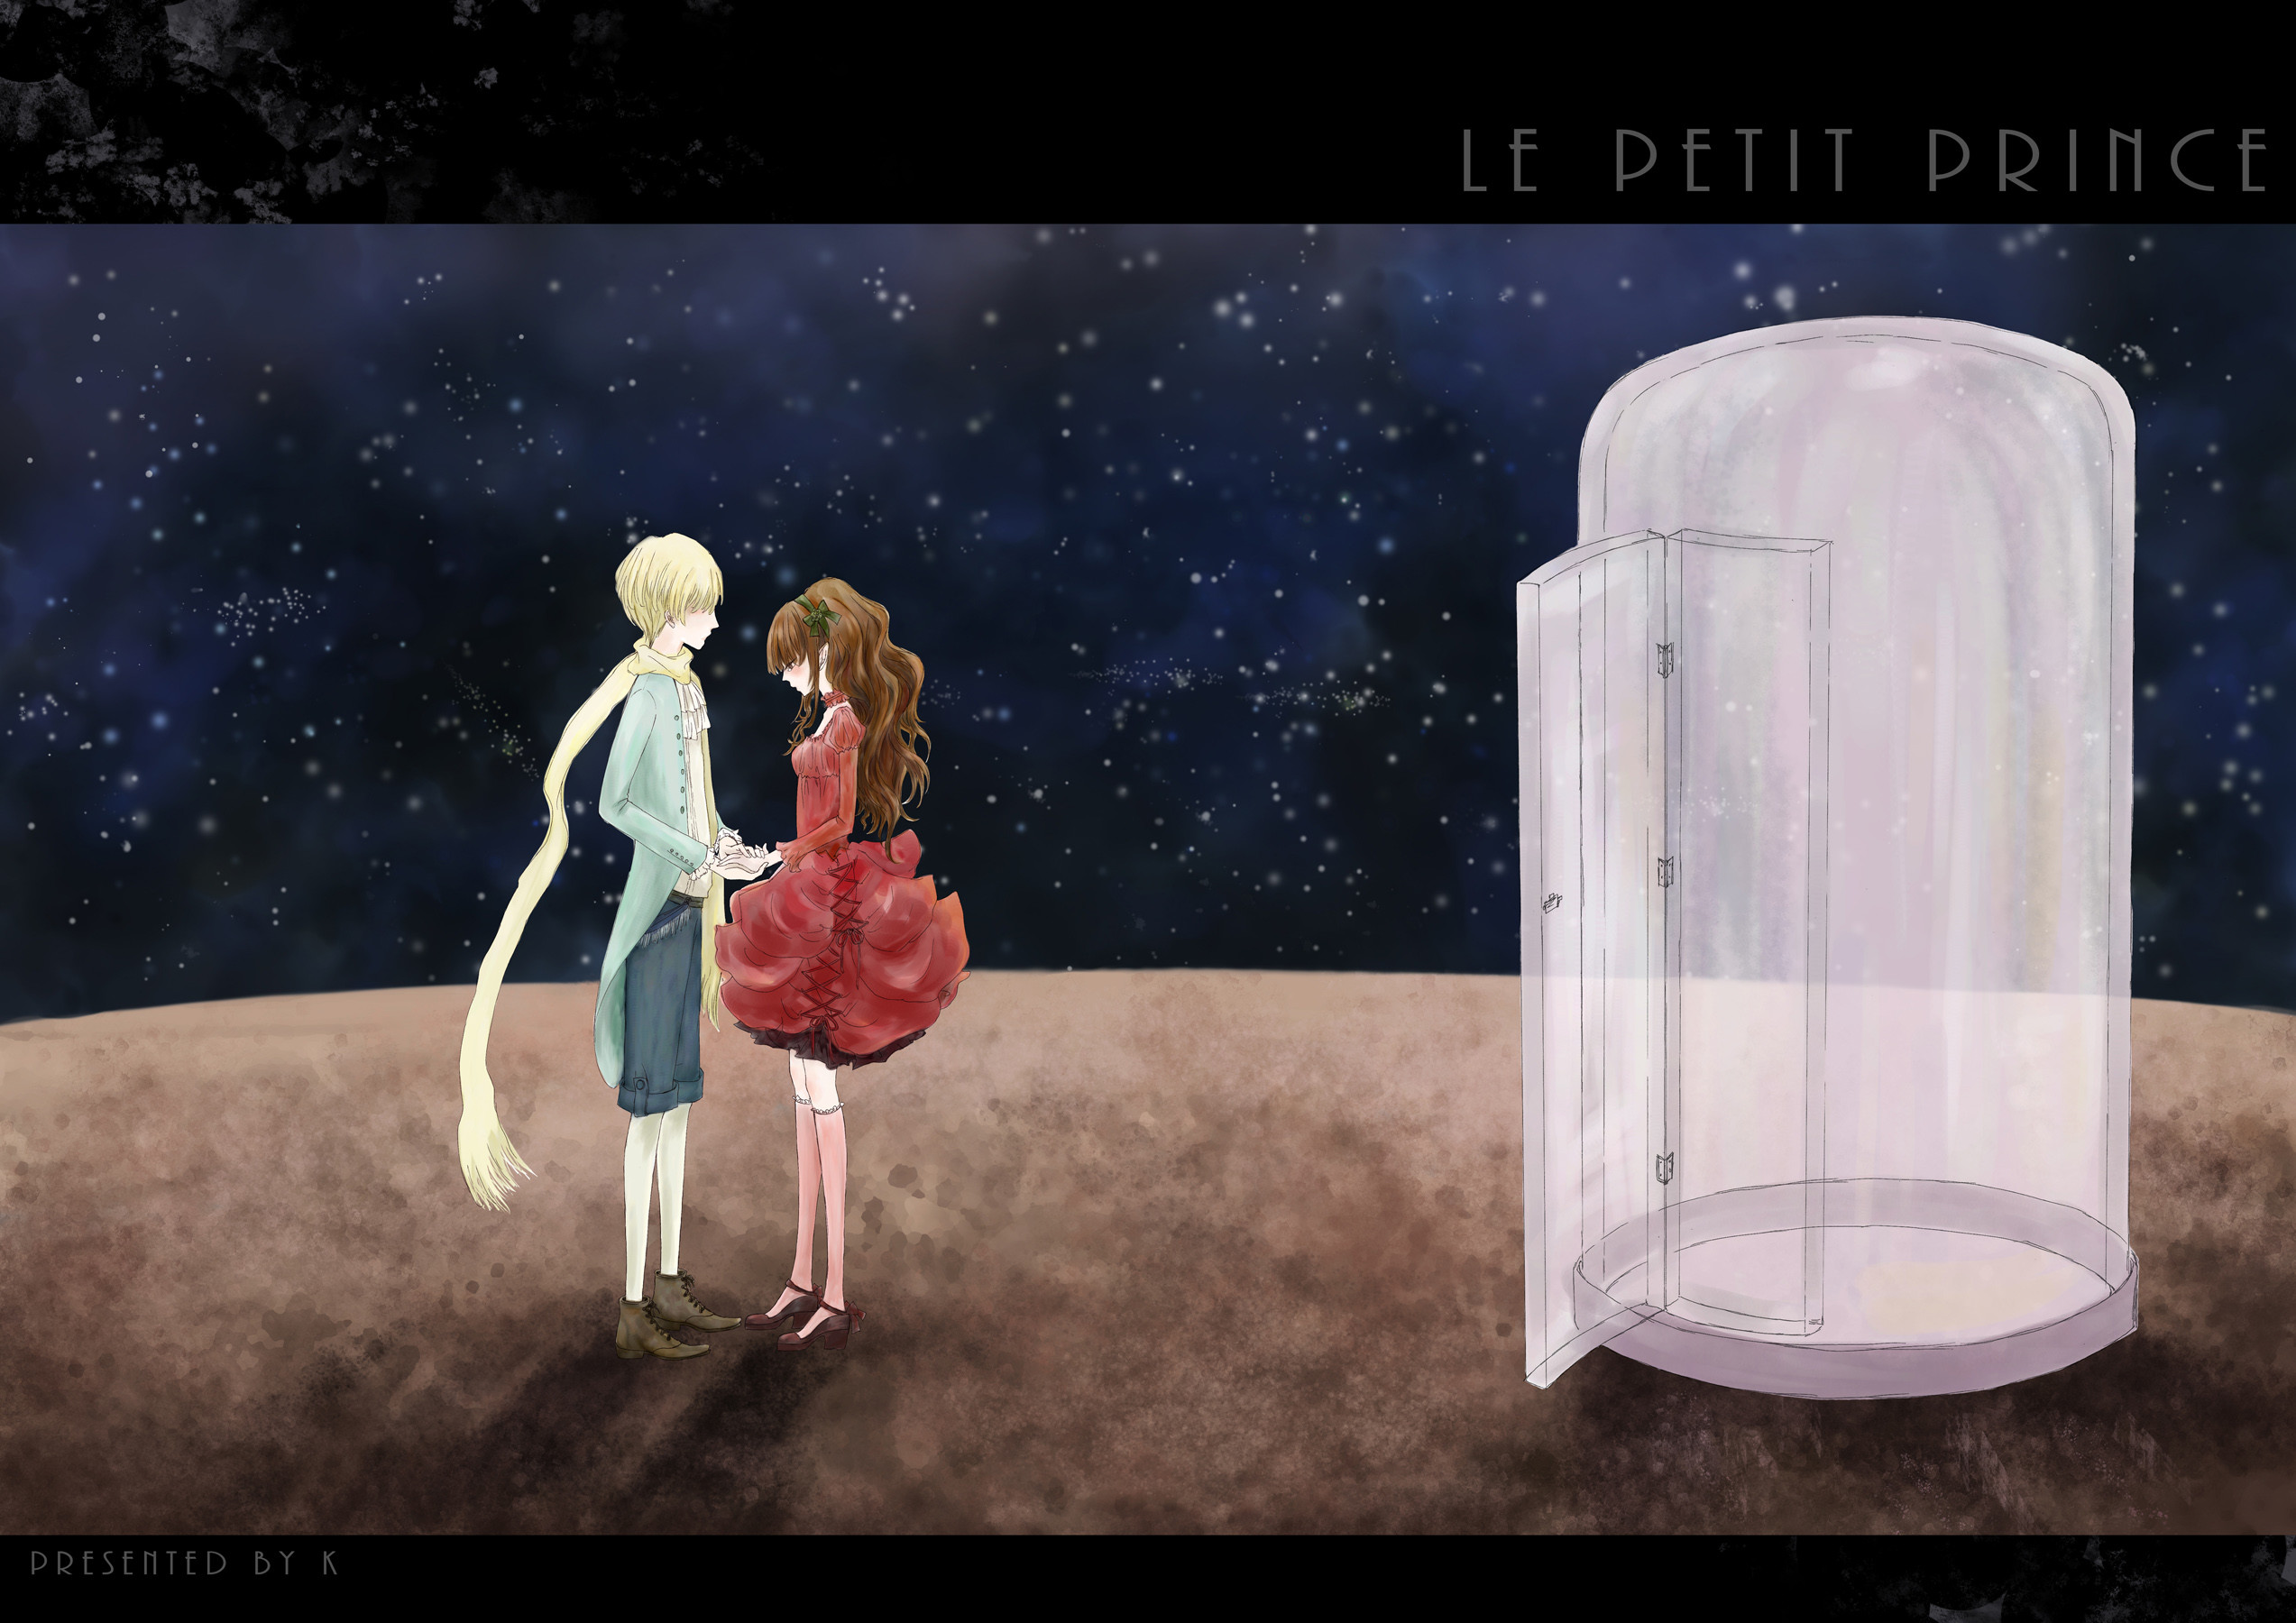 2546x1800 The Little Prince download The Little Prince image